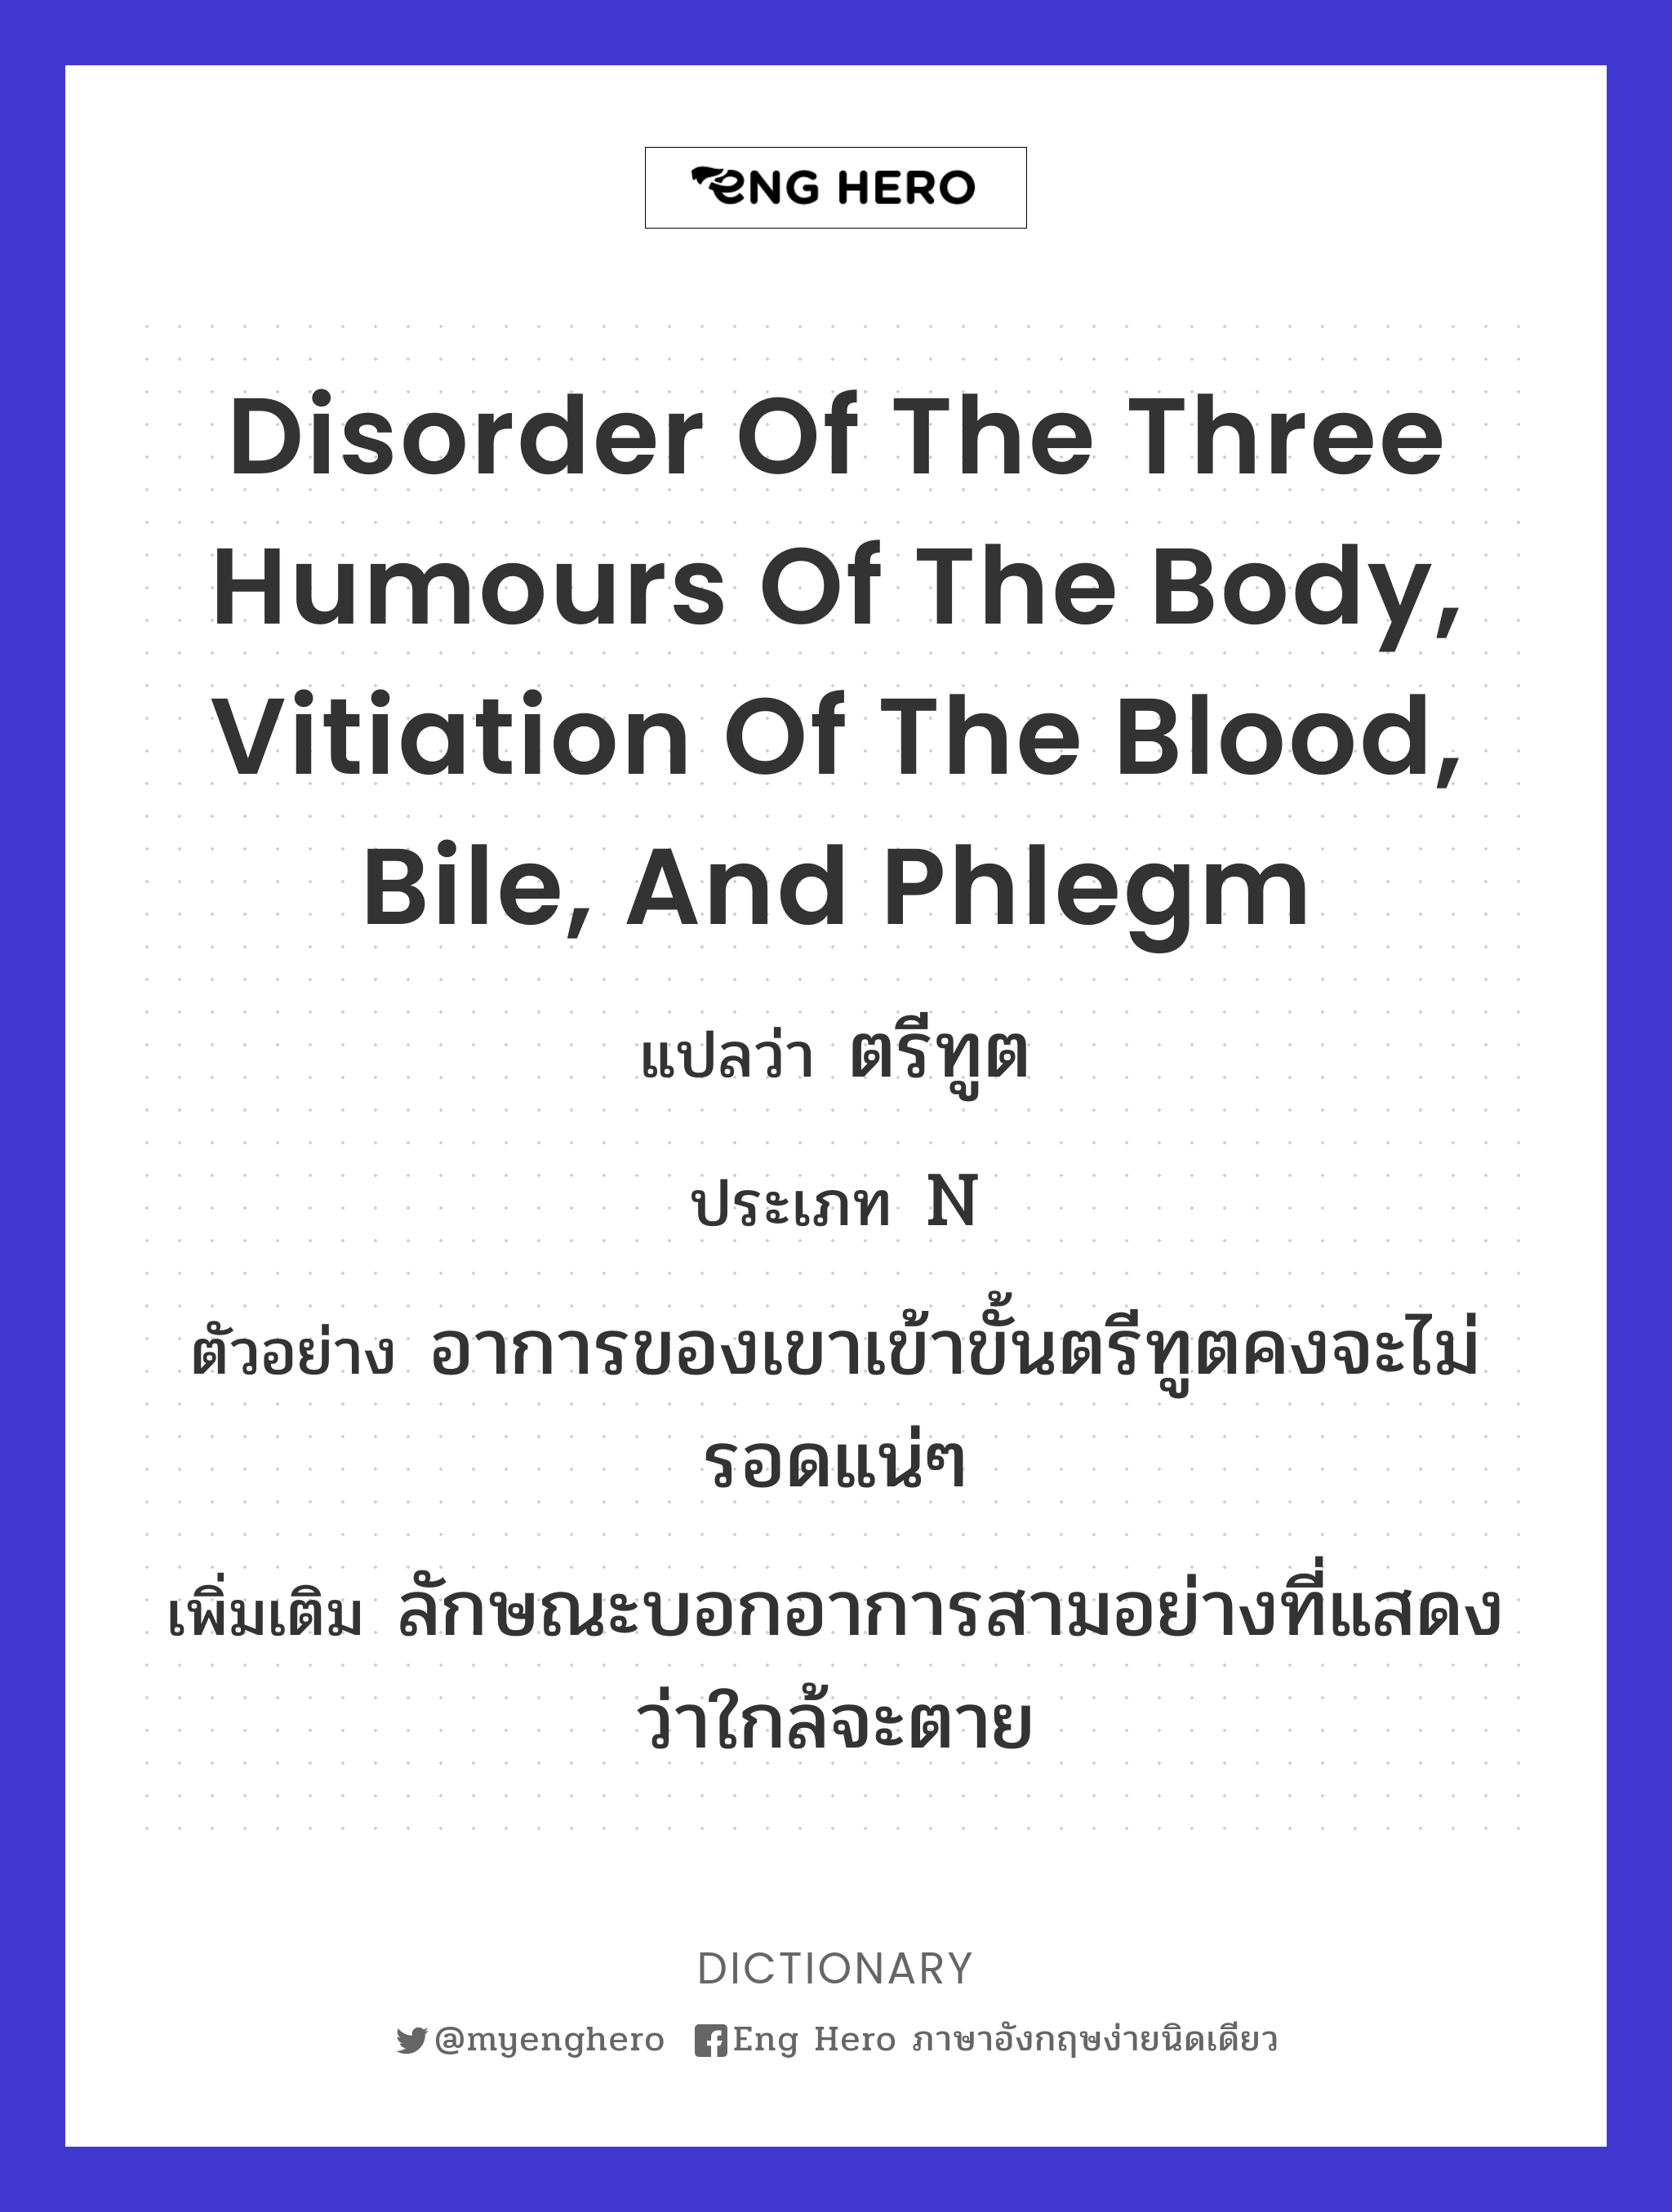 disorder of the three humours of the body, vitiation of the blood, bile, and phlegm